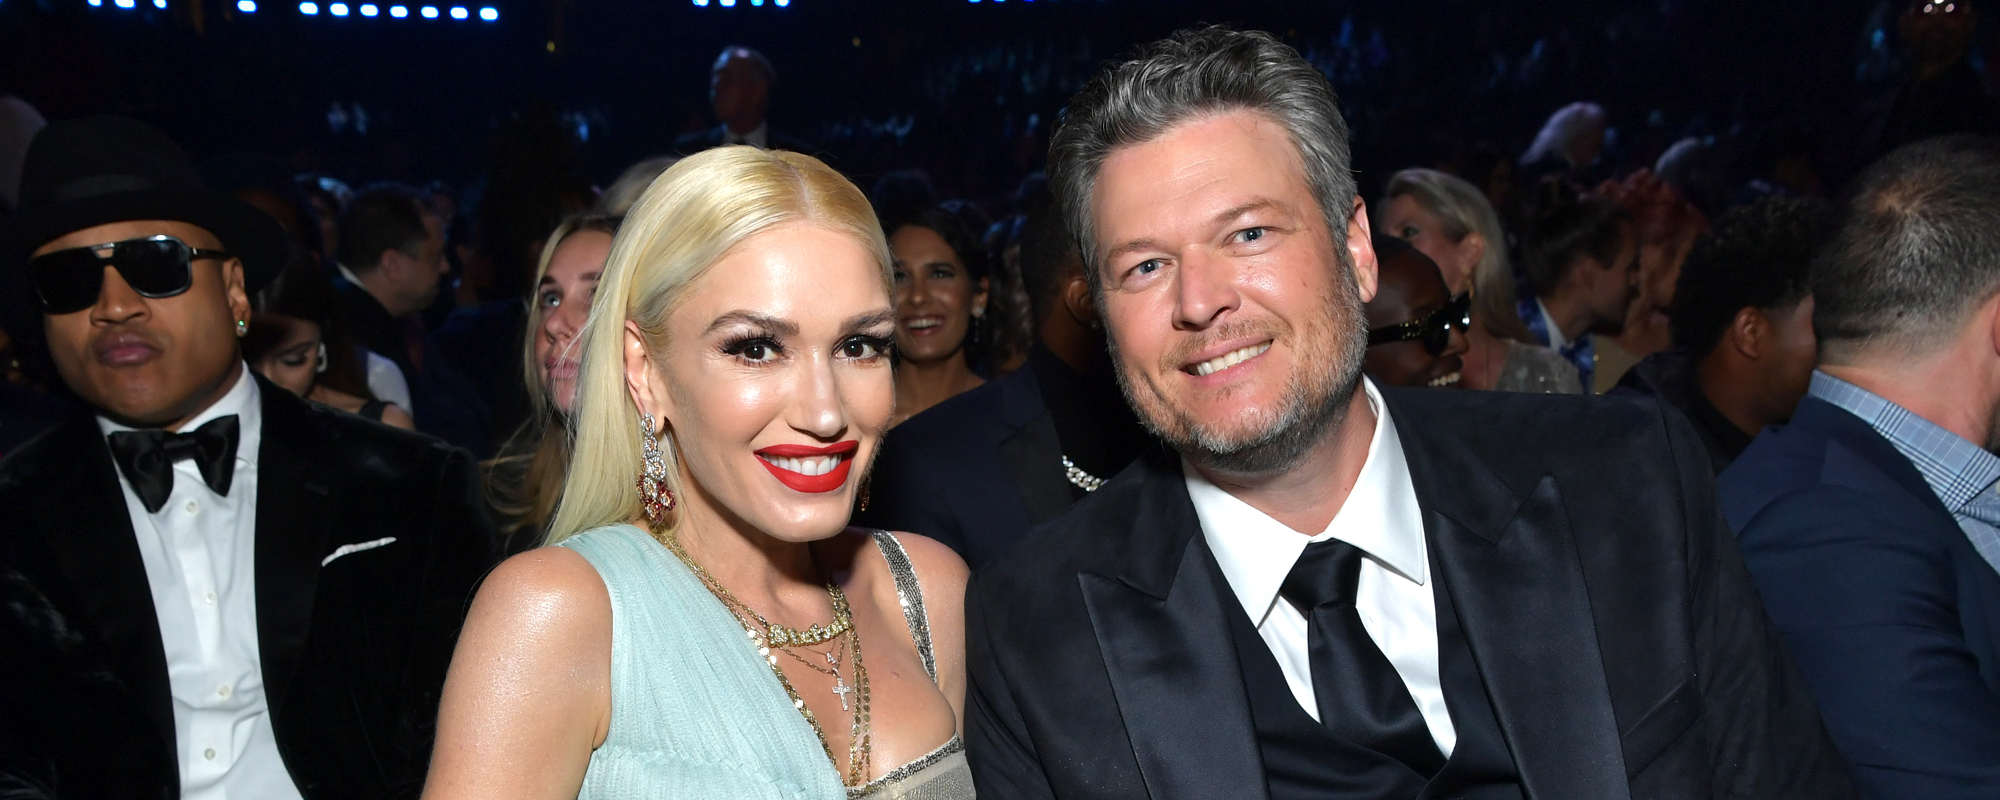 Gwen Stefani and Blake Shelton Share Festive Montage of Their “Over the Top” Christmas Alongside Family